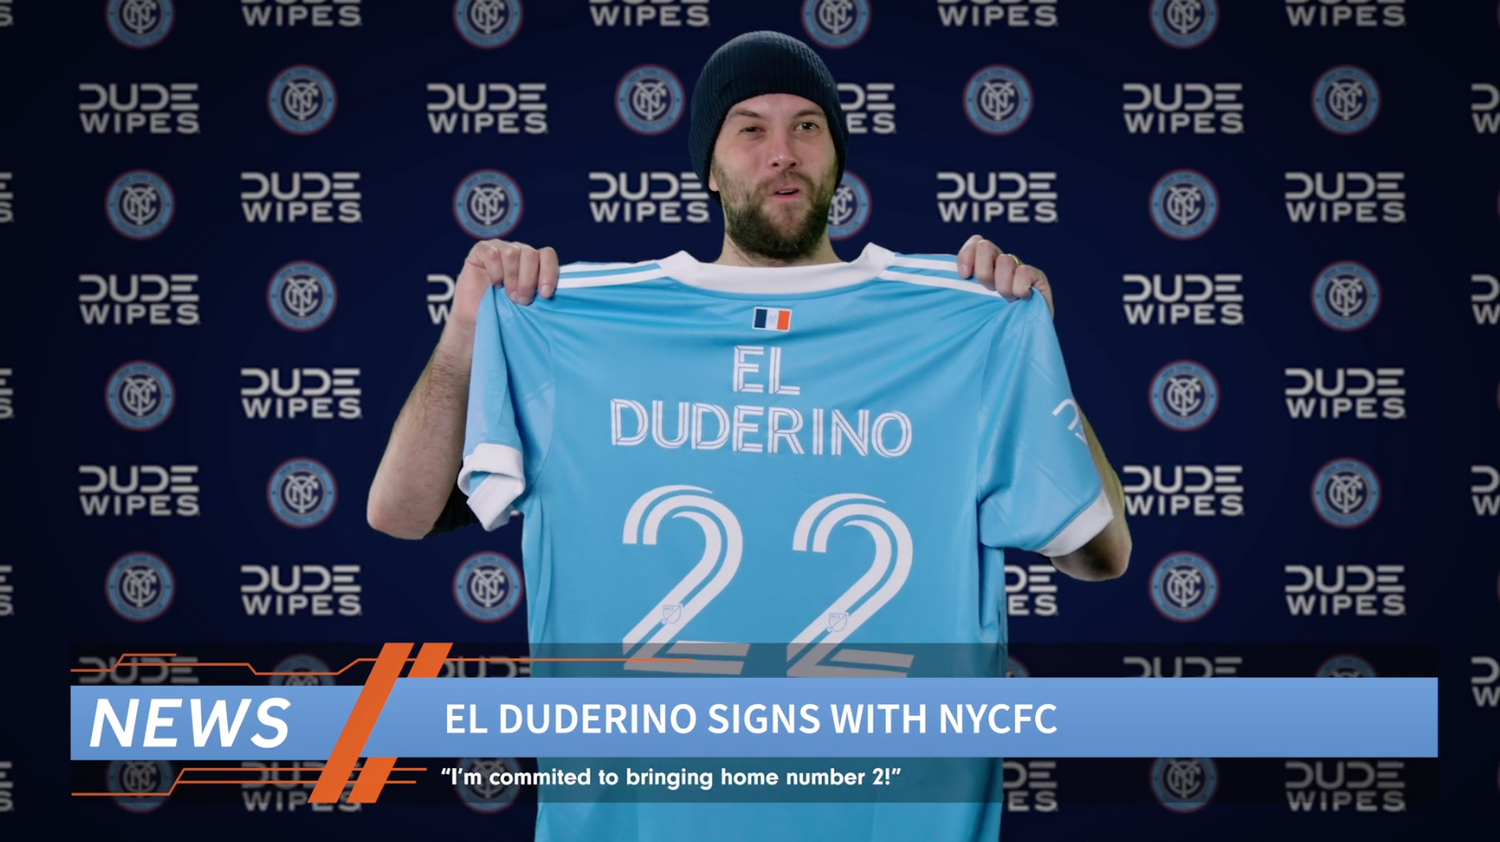 DUDE Wipes Partners with MLS Champs NYCFC to Chase #2